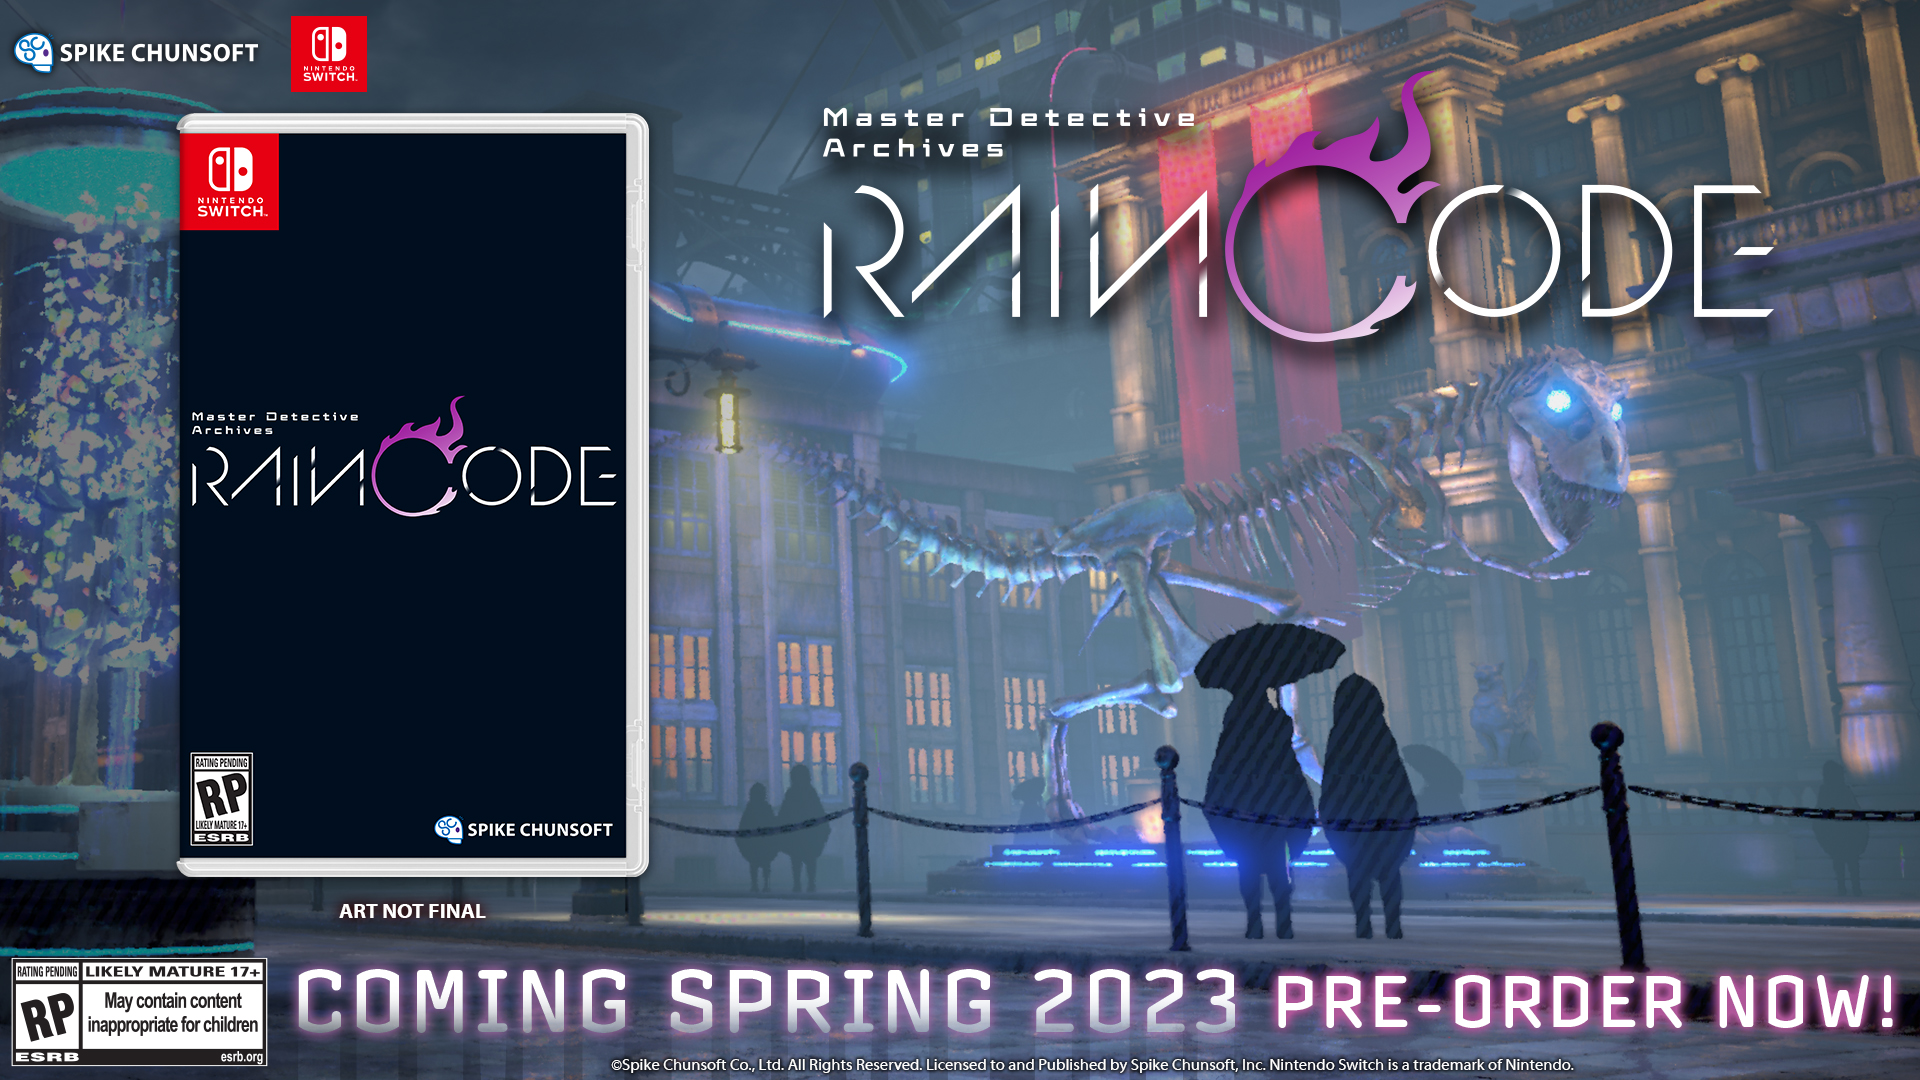 Master Detective Archives: for Revealed. Nintendo Details RAIN Open CODE - Mysteriful Chunsoft Switch™ Limited Today. Edition Spike Pre-Orders